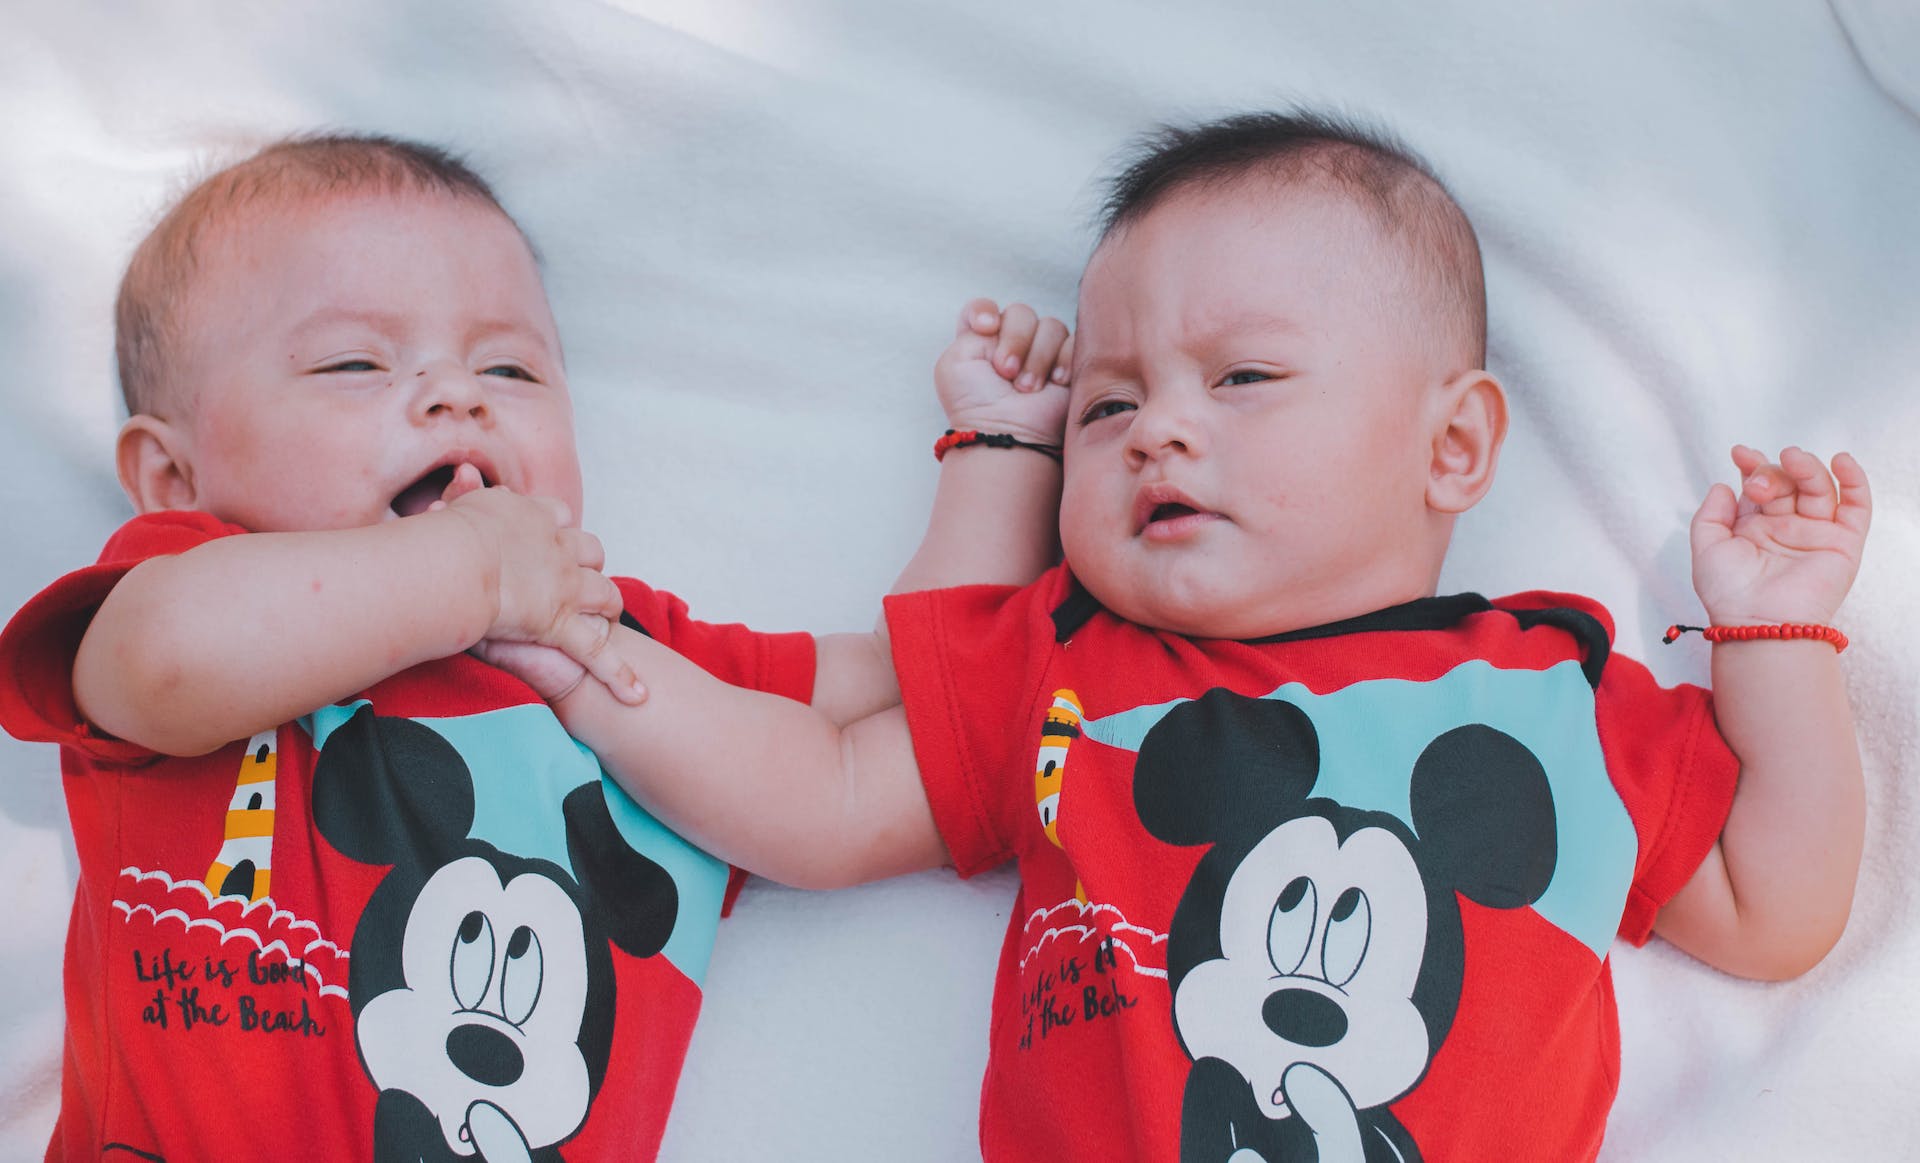 Two babies wearing red Mickey Mouse Shirts | Source: Pexels